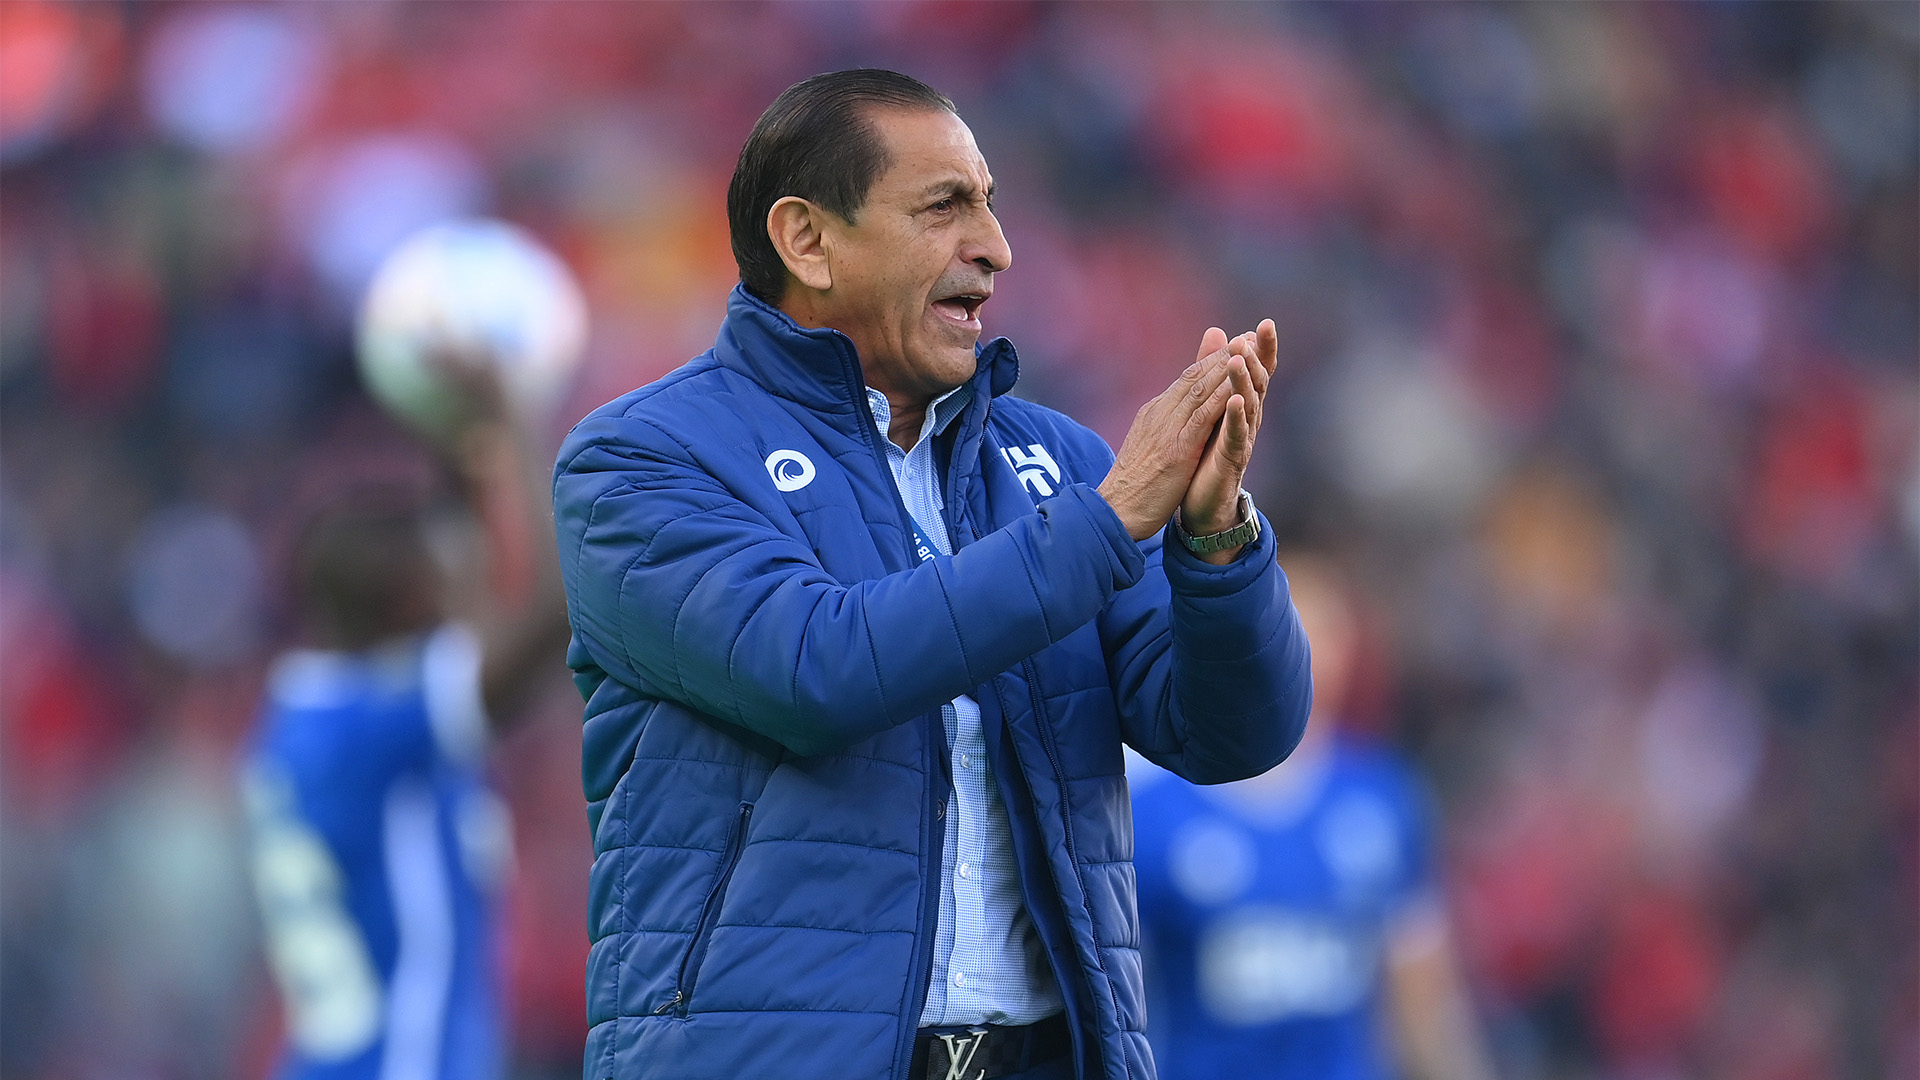 They propose to declare Ramón Díaz as the most winning Argentine coach in history